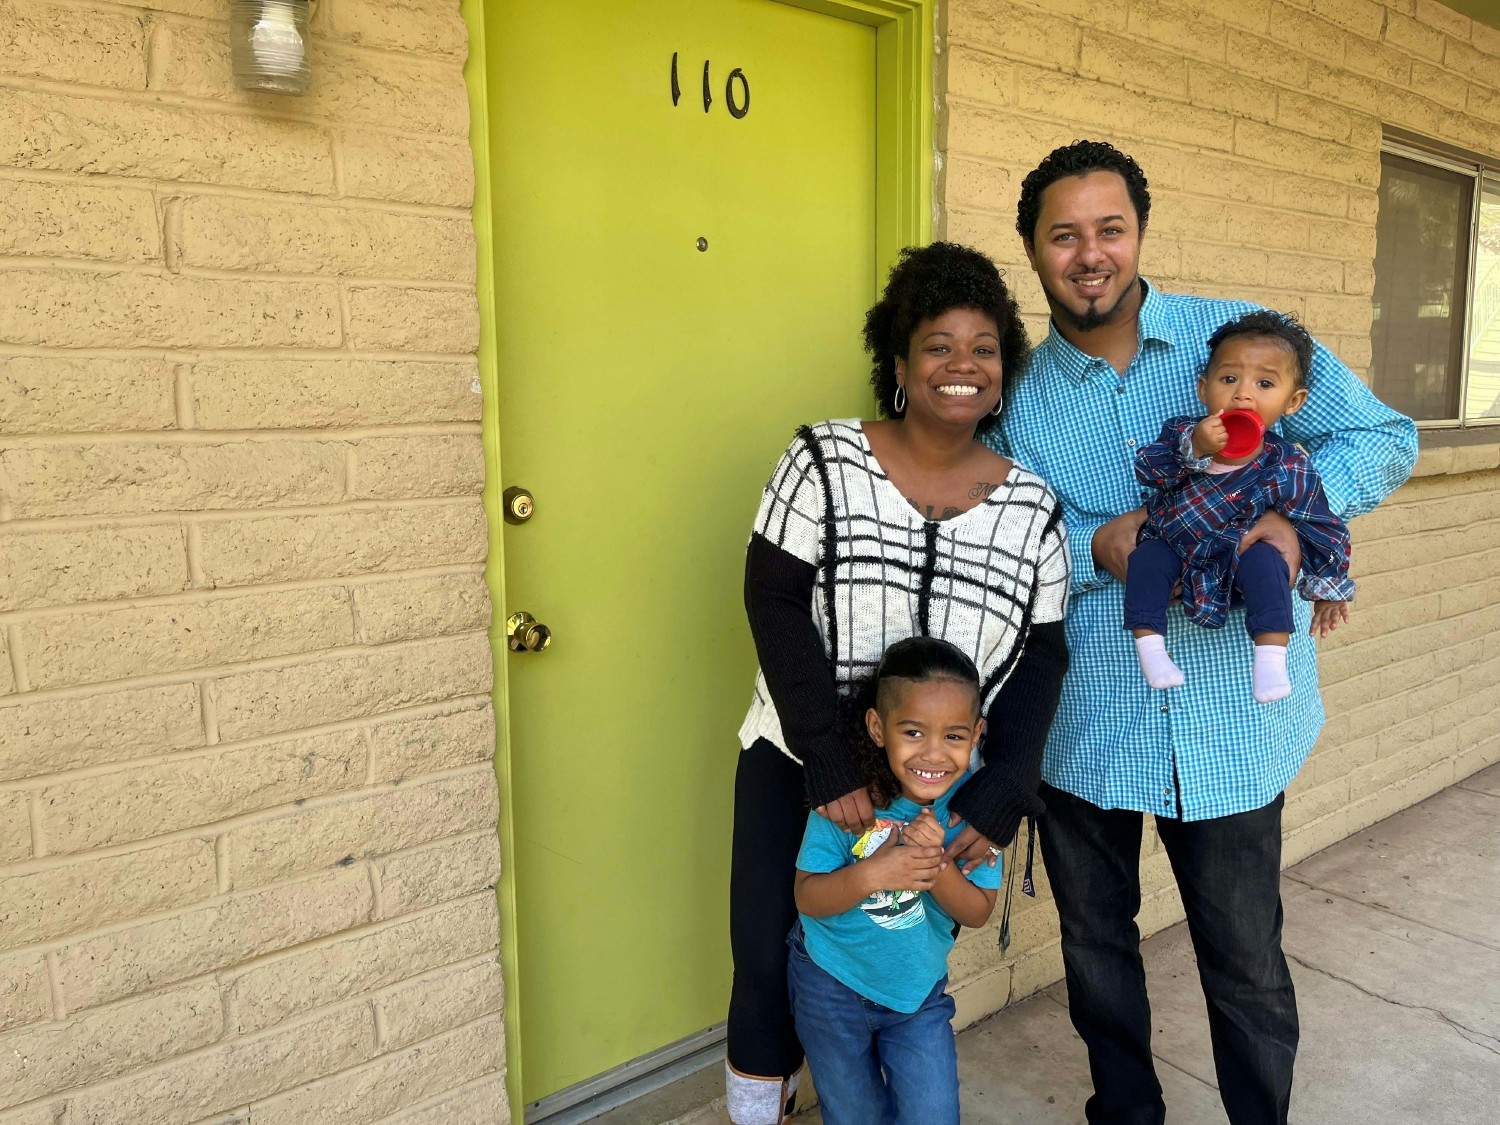 “OPCS saw our family was in need and they opened the door for us and immediately got us into housing.” The Ortiz Family